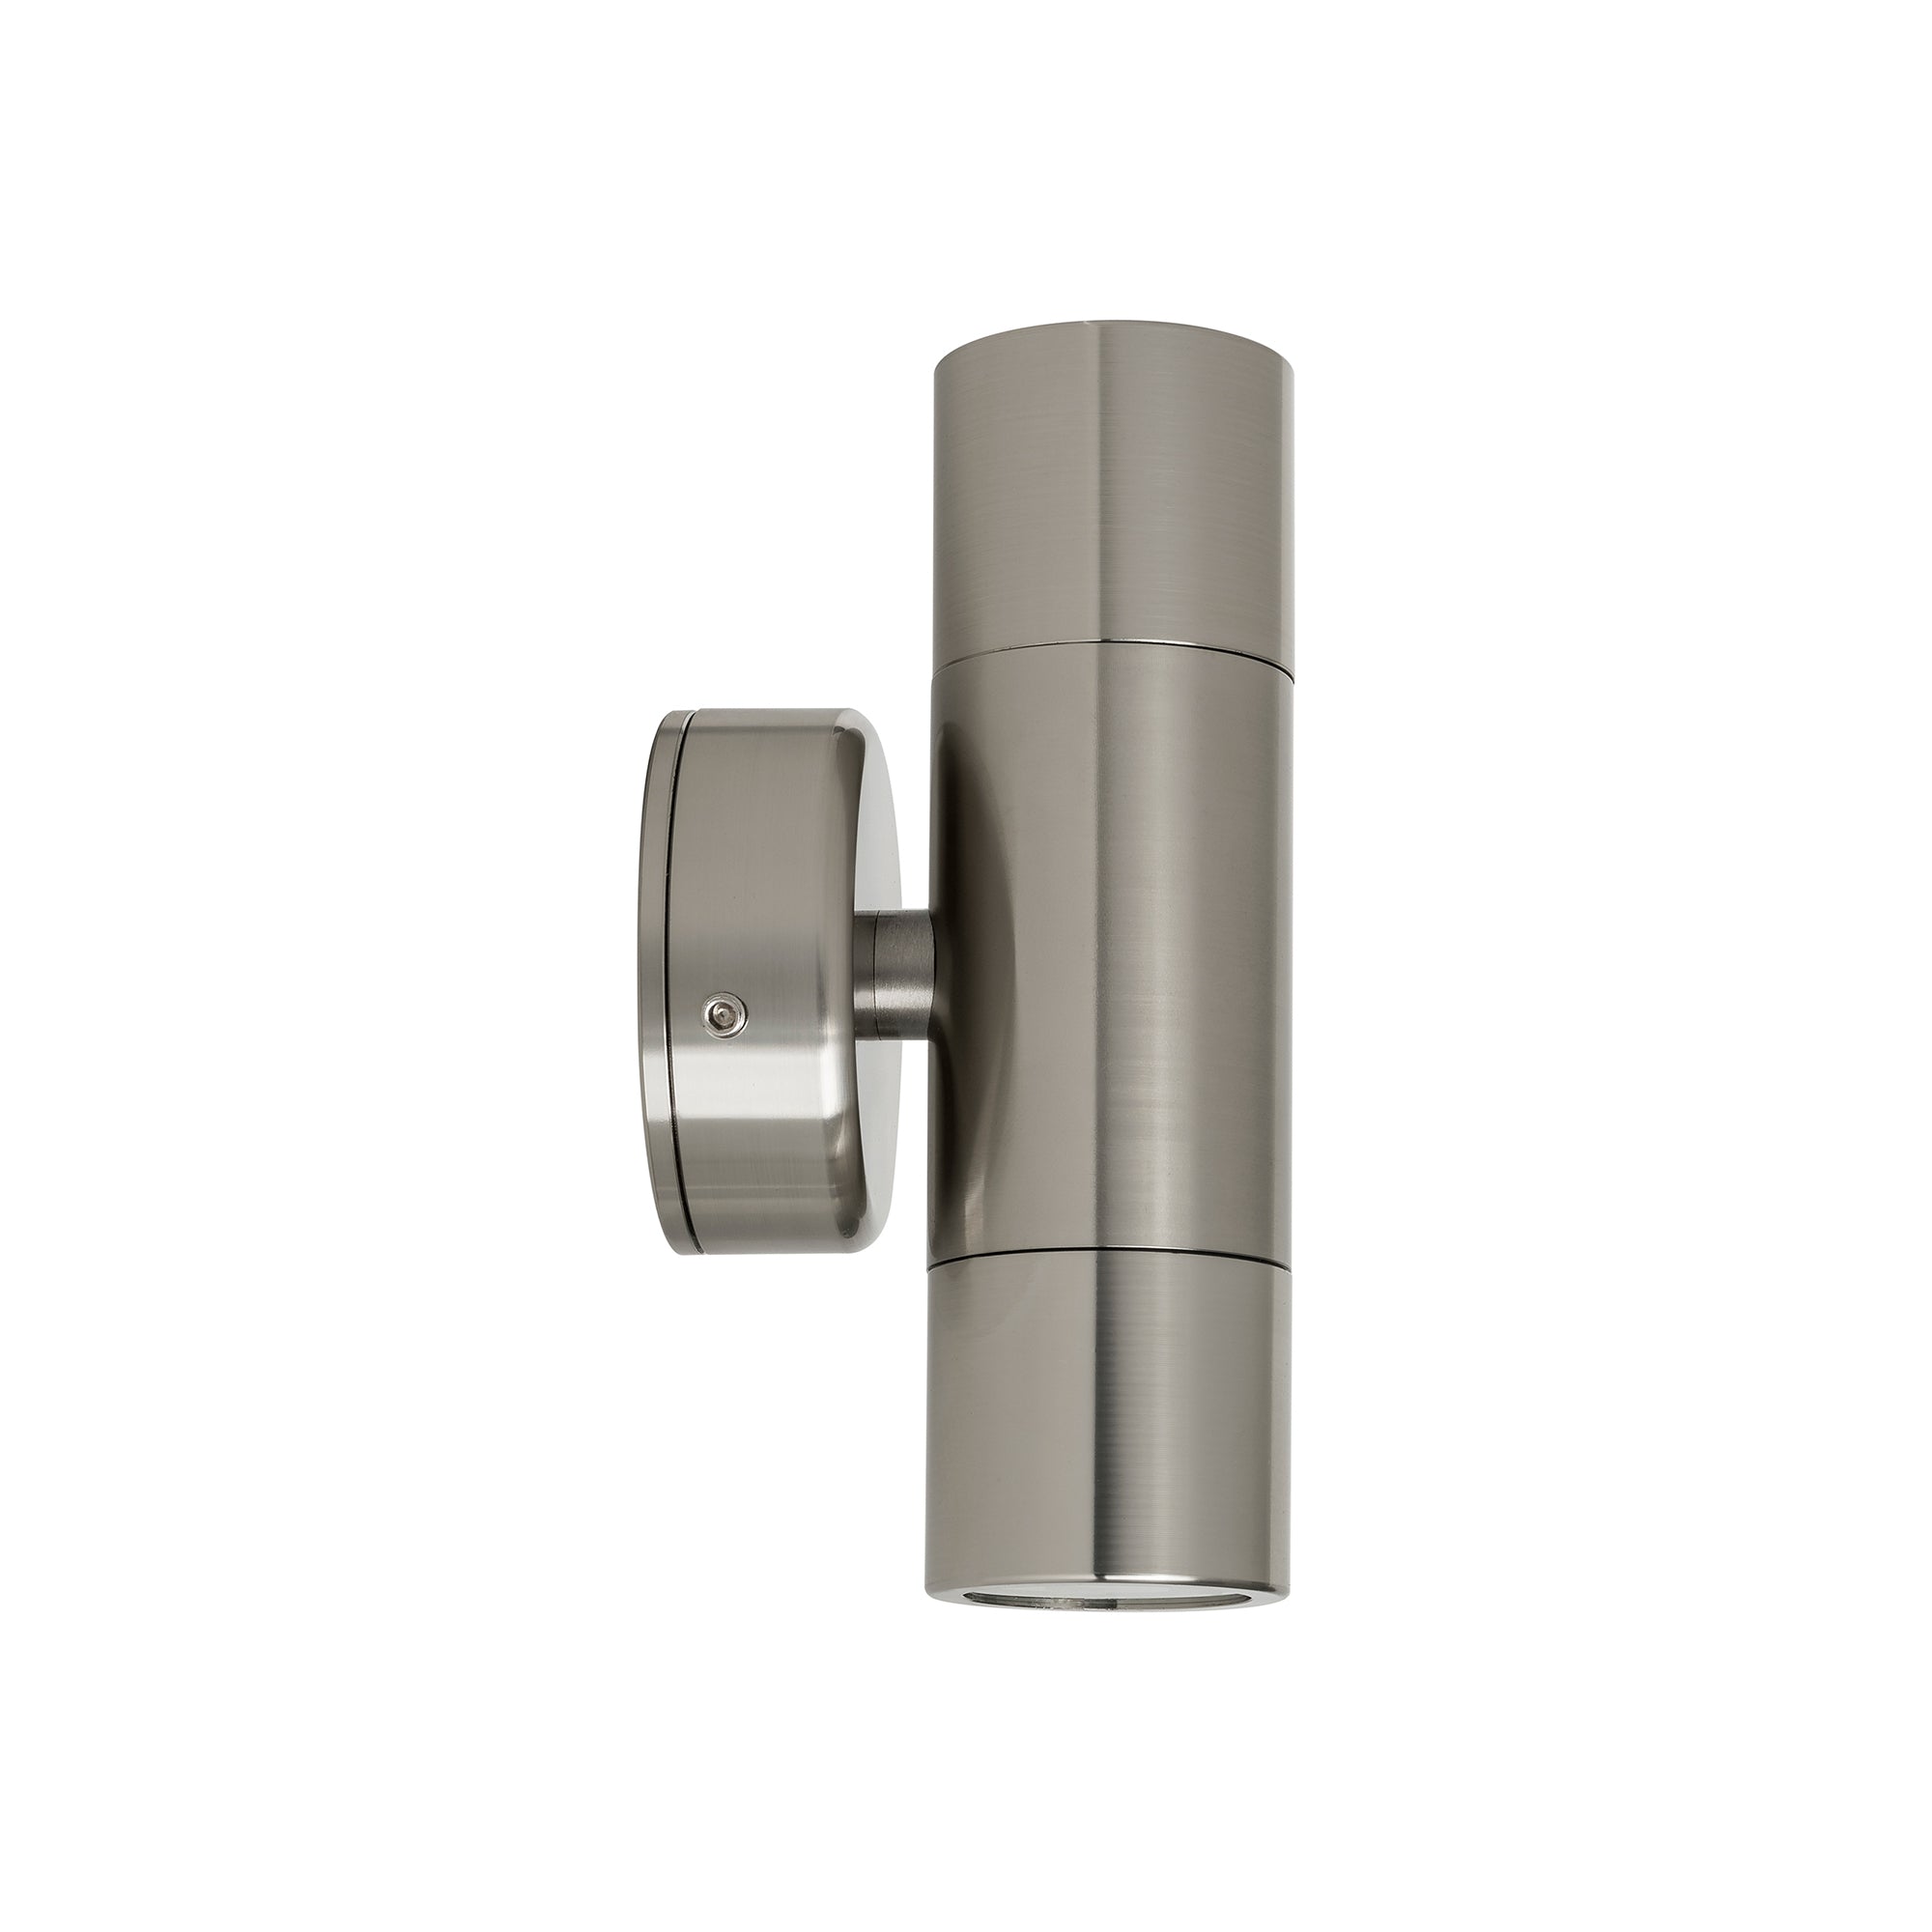 HV1007MR11NW - Mini Tivah 316 Stainless Steel Up & Down Wall Pillar Lights